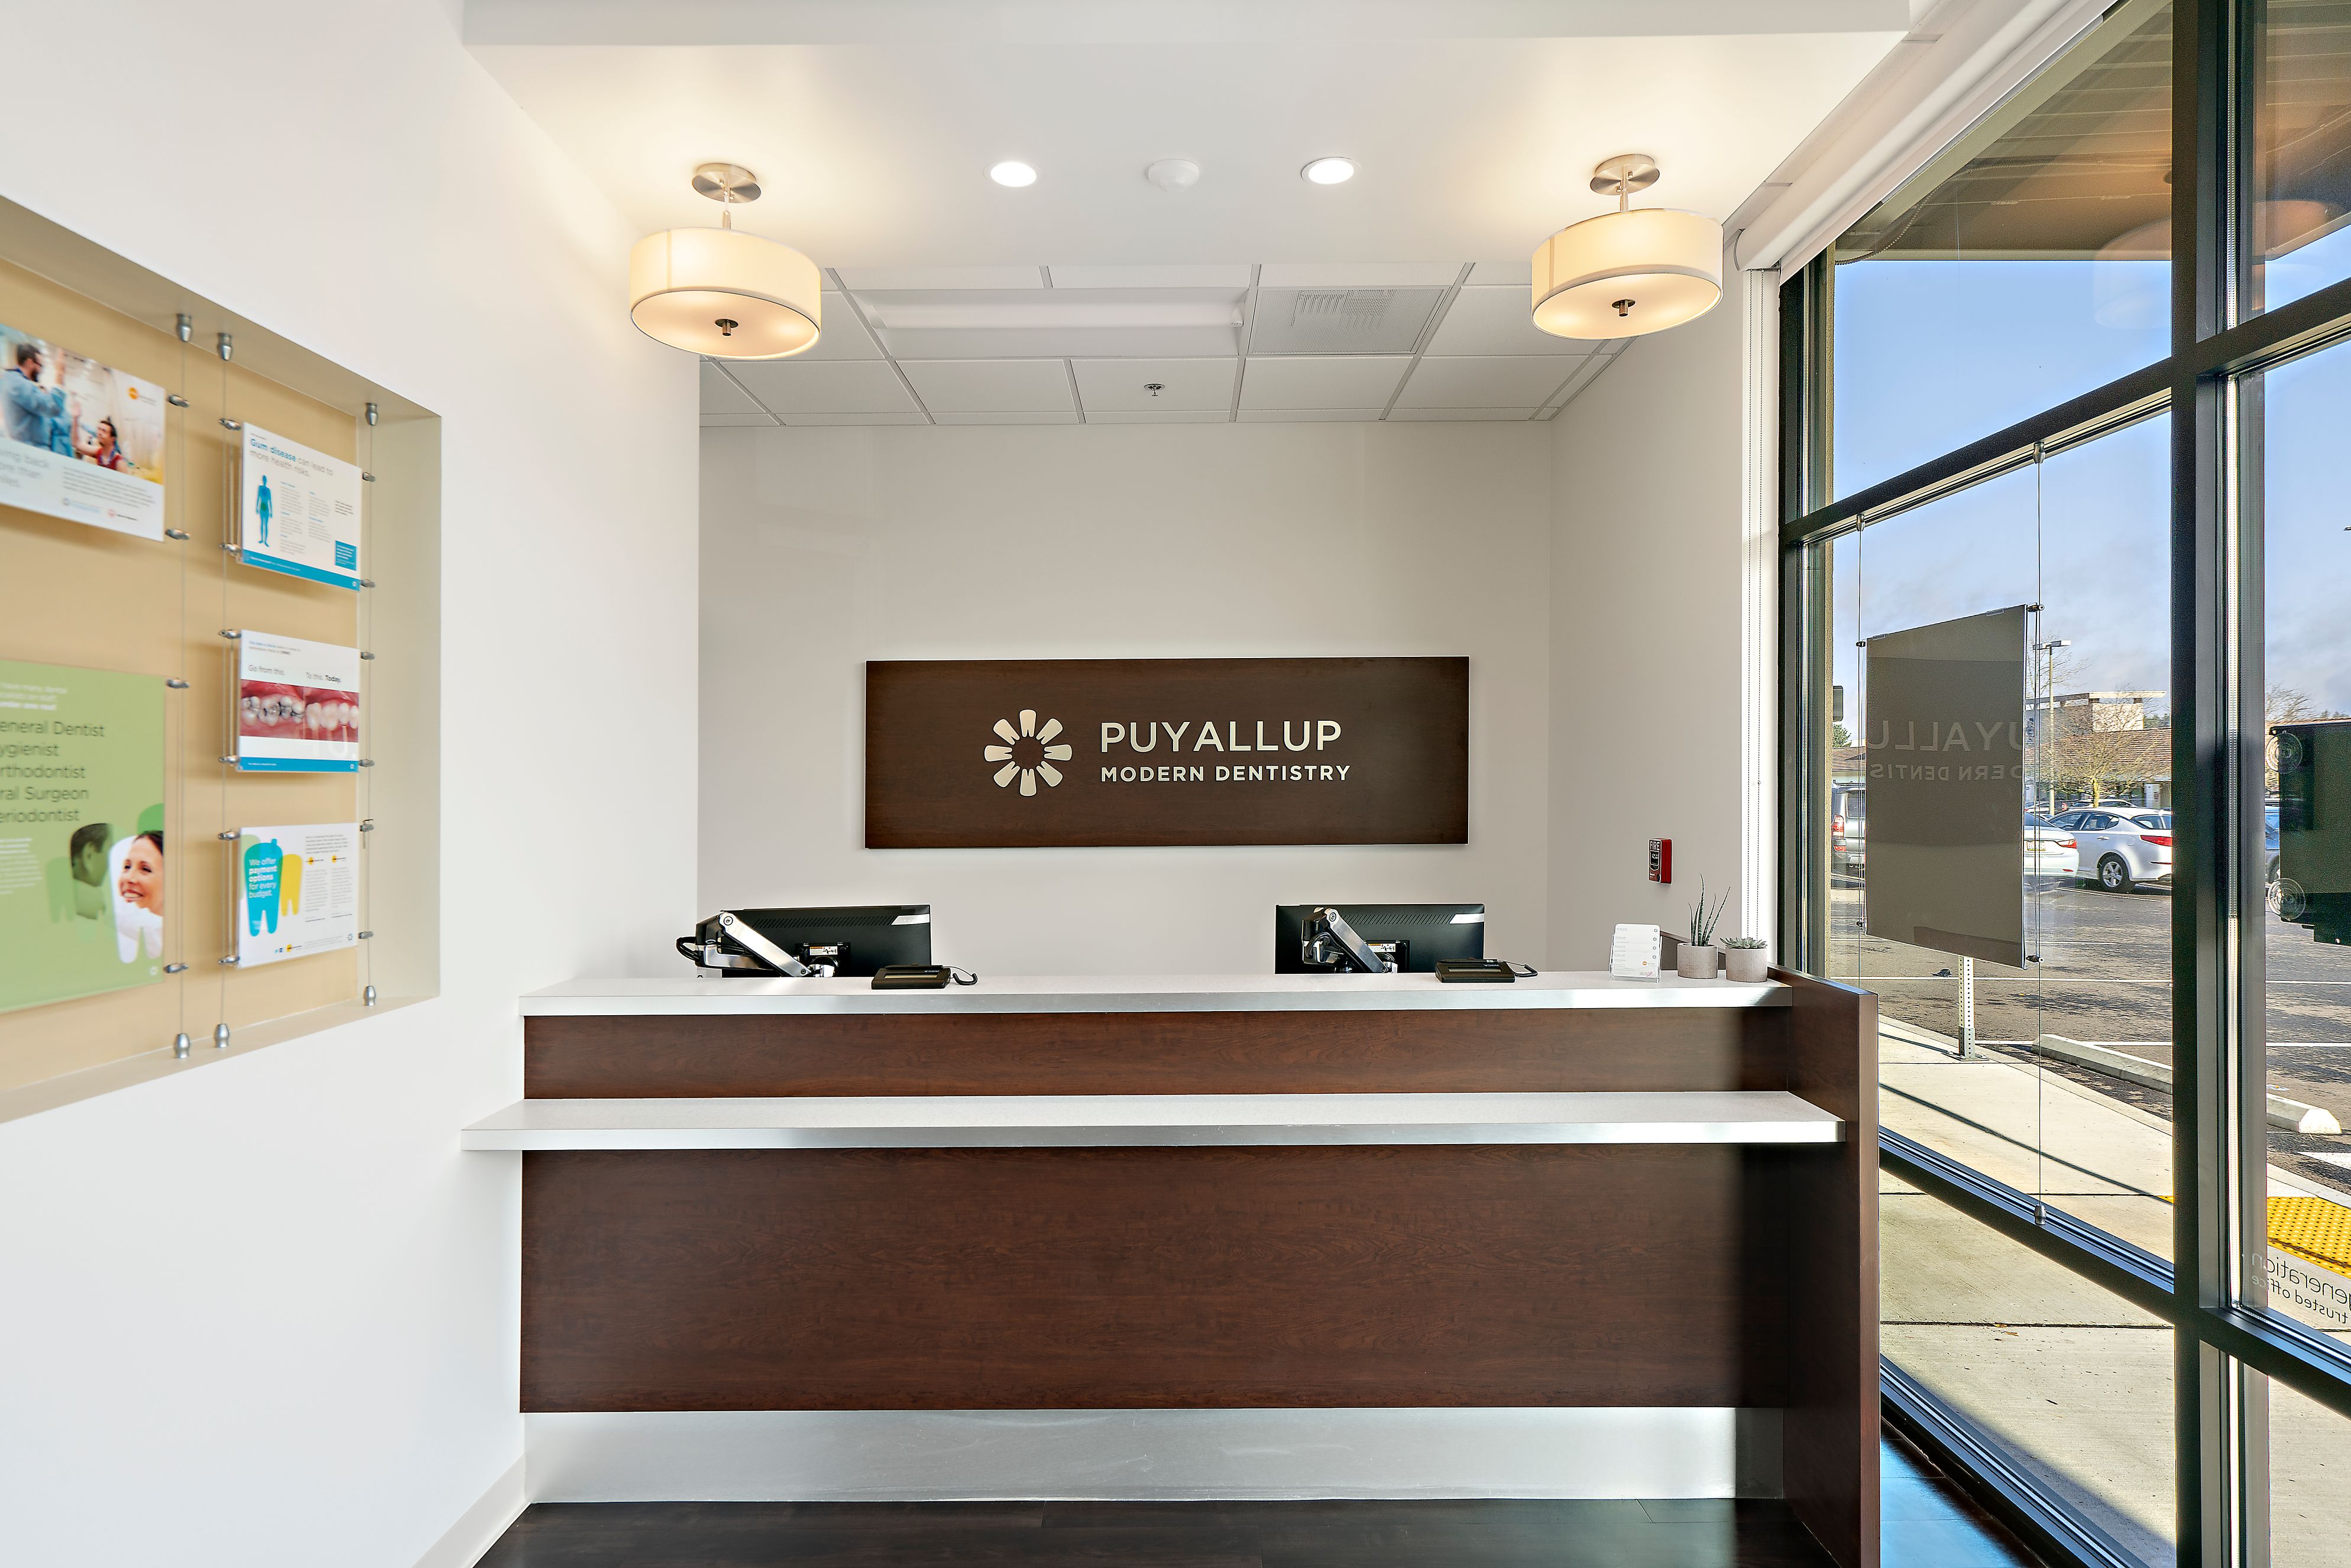 Puyallup Modern Dentistry opened its doors to the  Puyallup community in November 2019! Puyallup Modern Dentistry Puyallup (253)214-9293